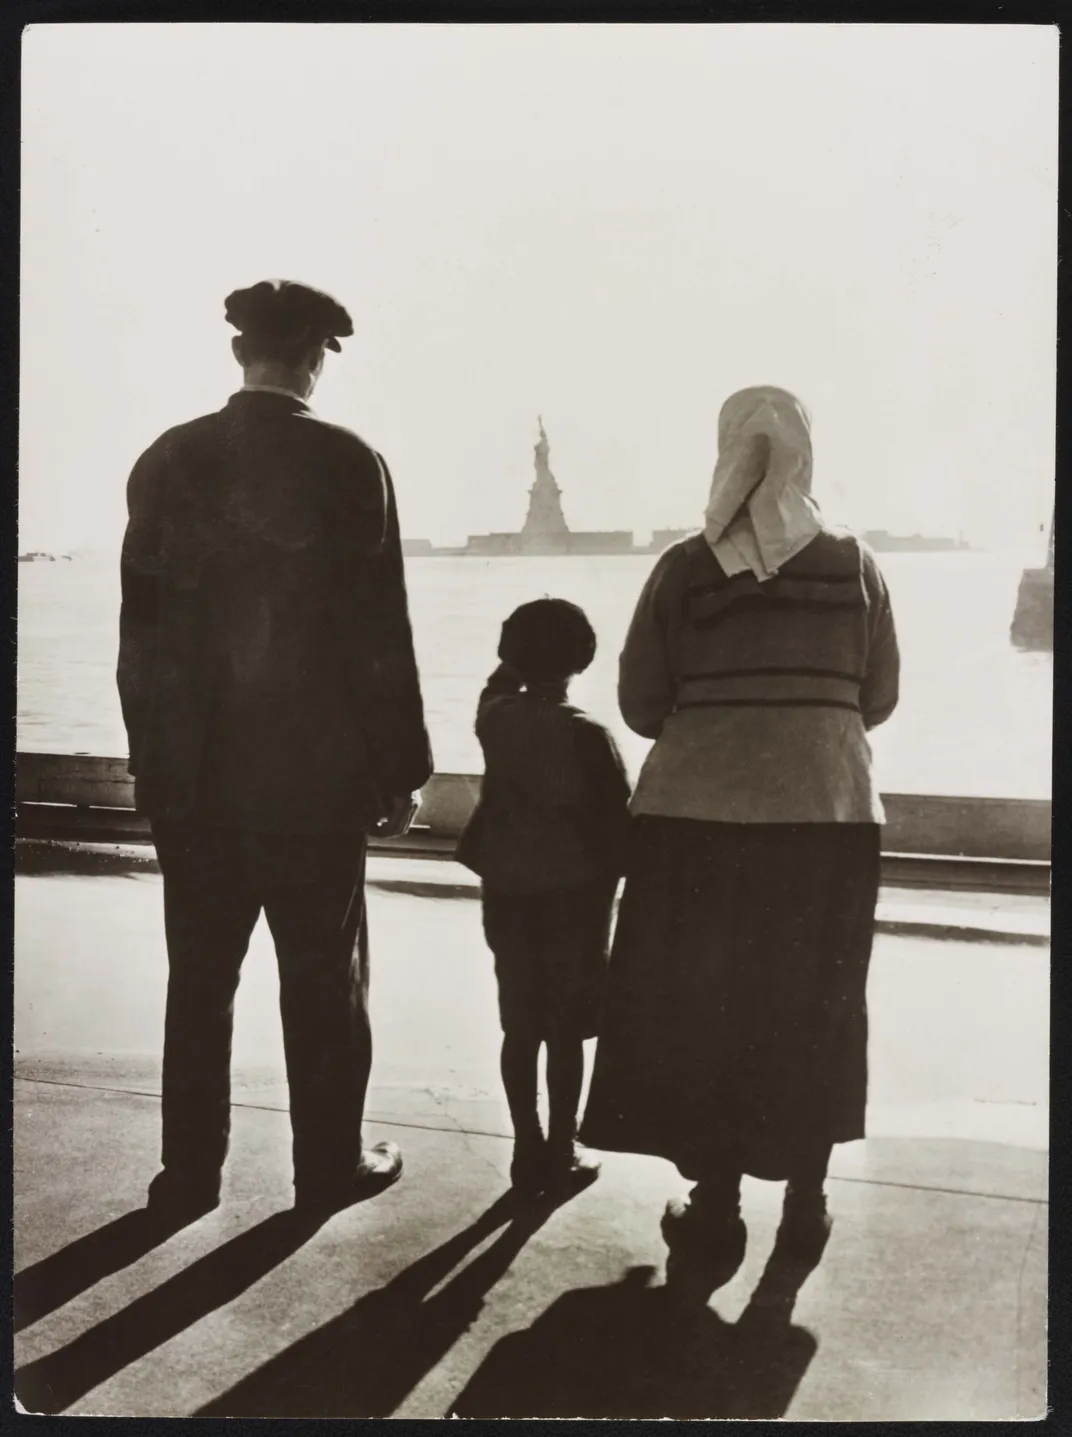 The Statue of Liberty, as seen from Ellis Island